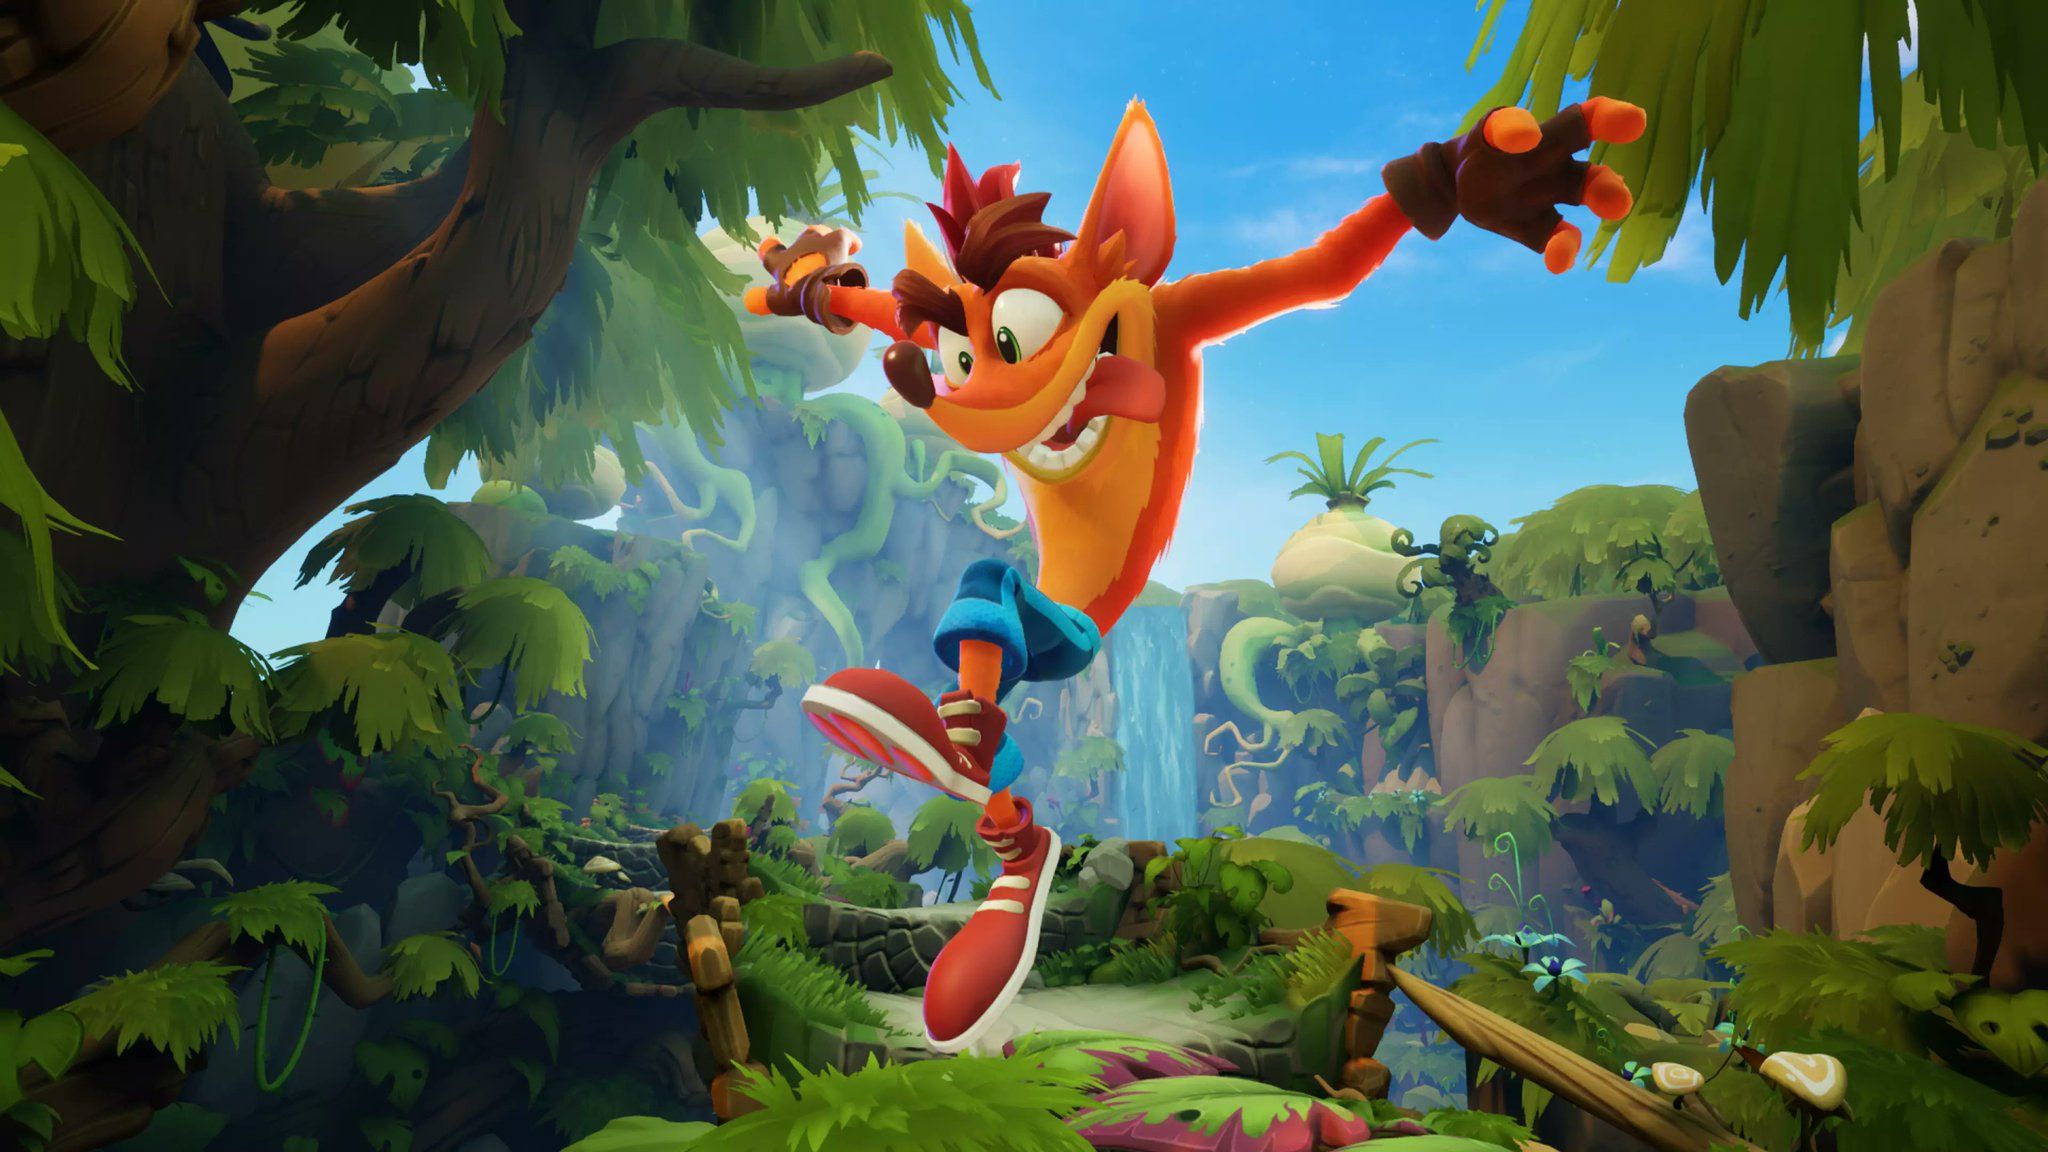 Activision has released the first Crash Bandicoot 4 trailer